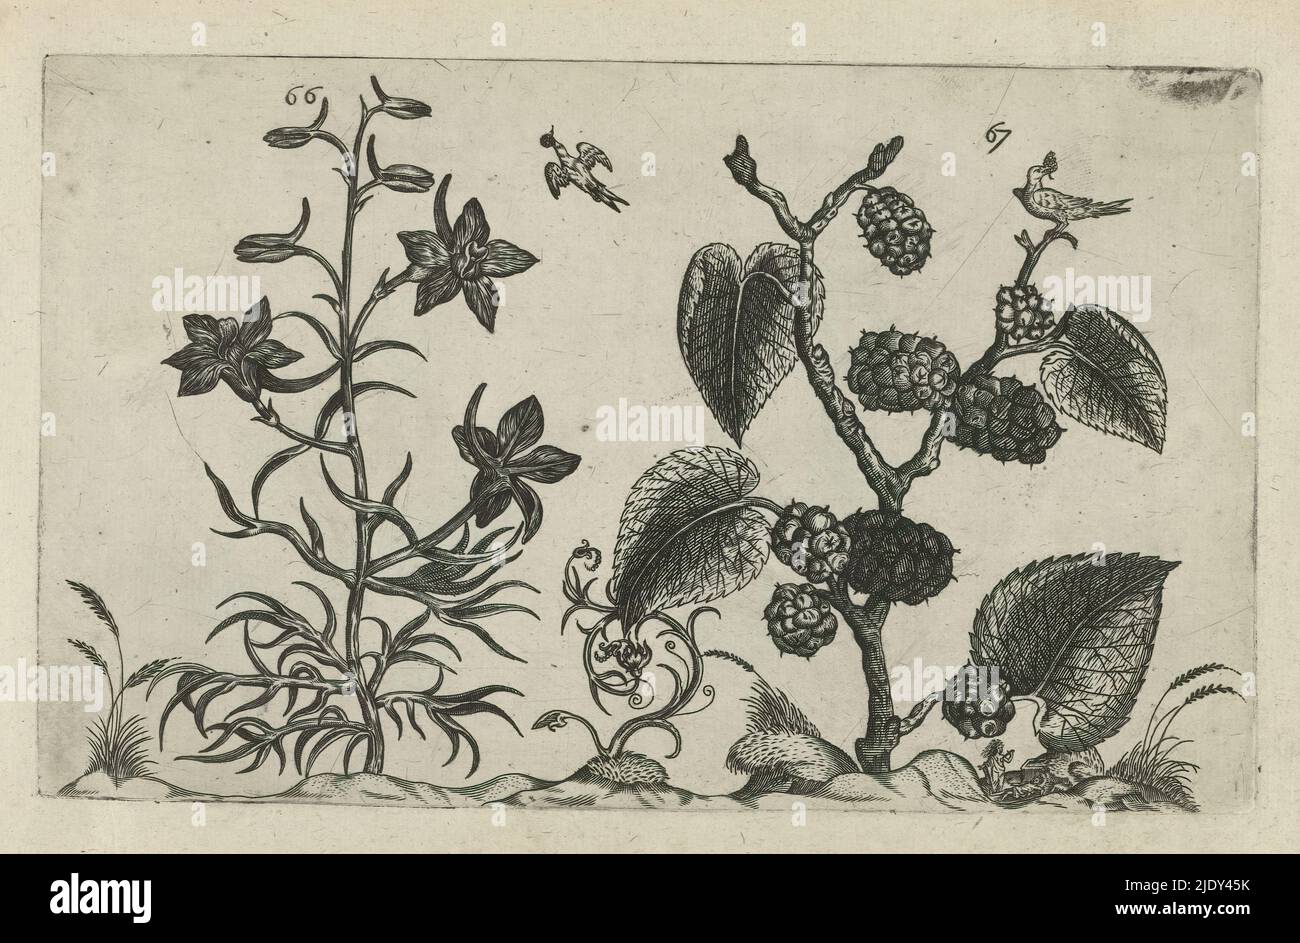 Wild delphinium and black mulberry, Cognoscite lilia (series title), Wild delphinium (Delphinium consolida) and black mulberry (Morus nigra), numbered 66 and 67. Accompanying them are two birds. Below right Pyramus and Thisbe., print maker: Crispijn van de Passe (I), (attributed to), after drawing by: Crispijn van de Passe (I), (attributed to), publisher: Crispijn van de Passe (I), print maker: Cologne, after drawing by: Cologne, publisher: Cologne, publisher: London, 1600 - 1604, paper, engraving, height 127 mm × width 205 mm, height 172 mm × width 272 mm Stock Photo